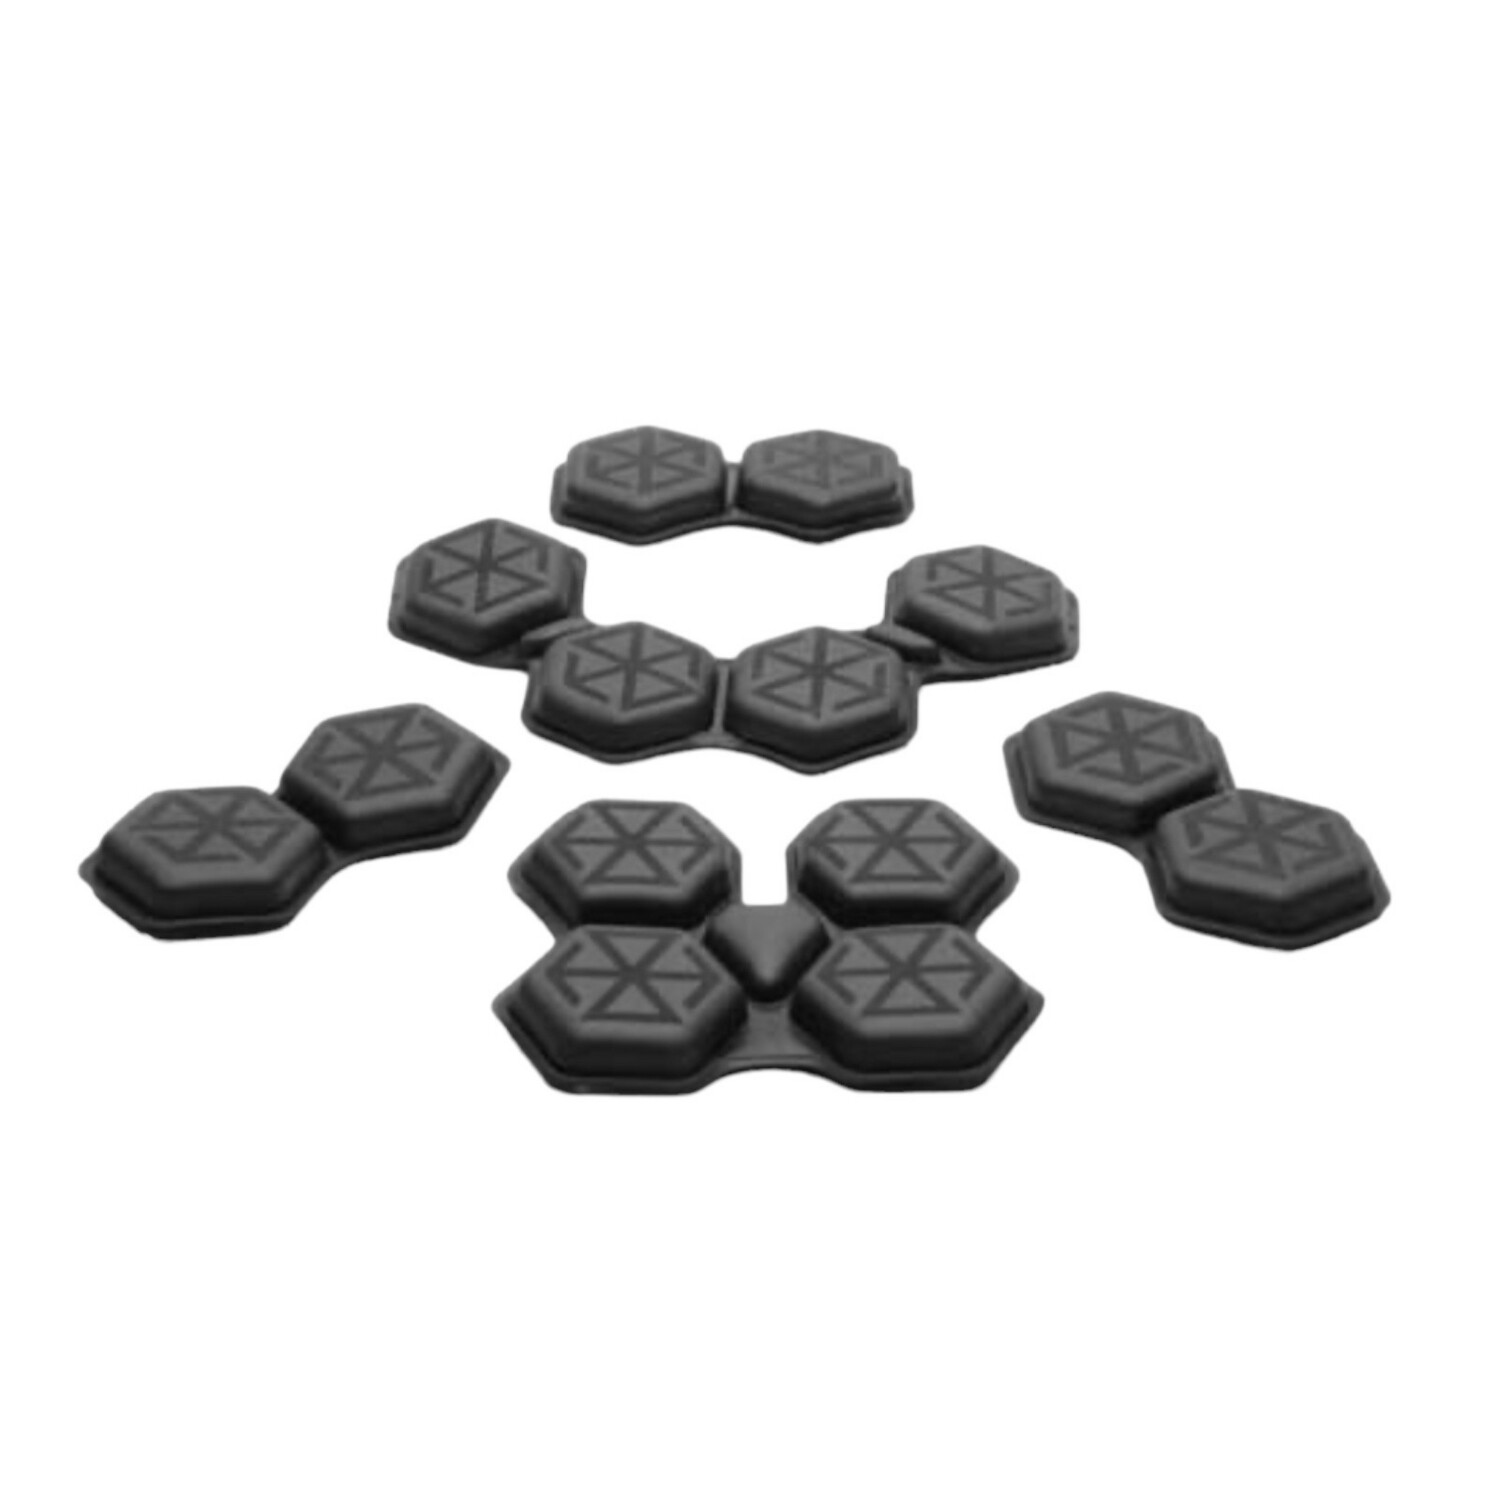 XENITH EPIC CONFORT PADS 